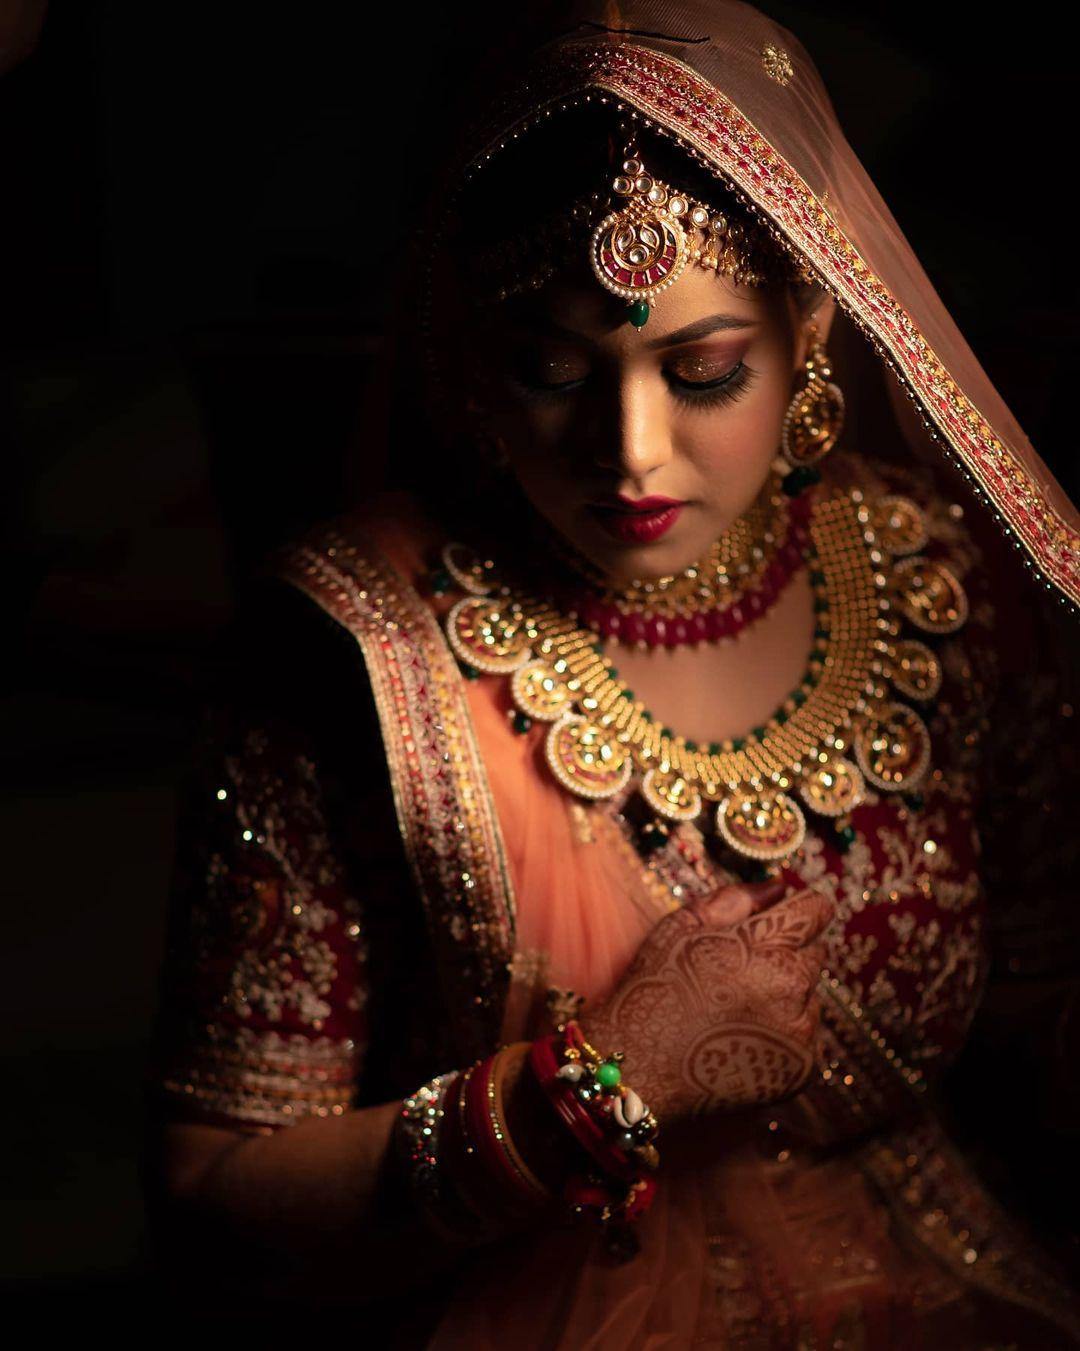 Pin by Bint Ijaz on Pakistani bridals | Indian bride photography poses,  Indian wedding photography poses, Indian bride poses